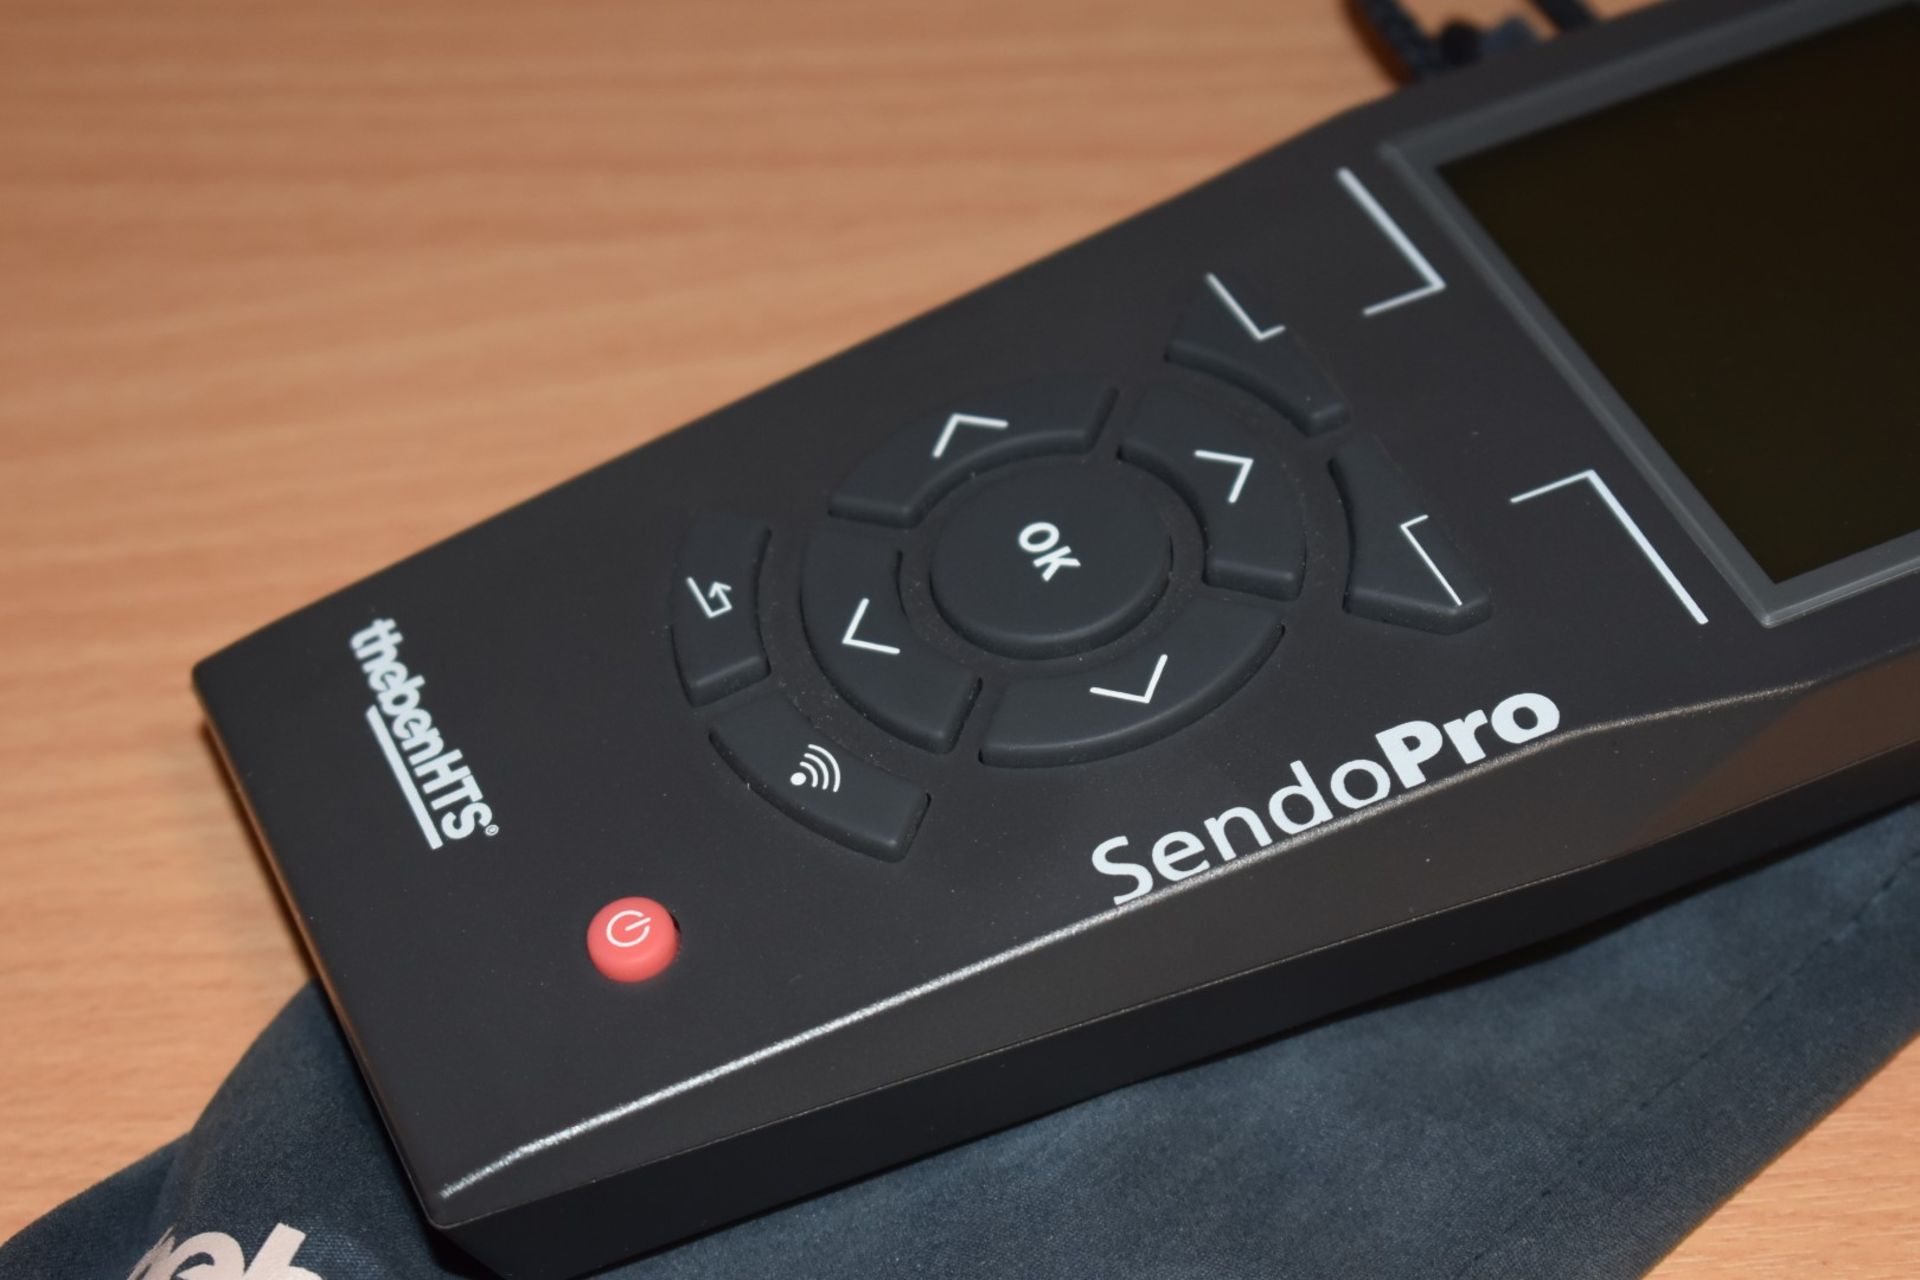 1 x Theben HTS Sendo Pro Infrared Remote Control For Startup of Thebenhts Sensors - Image 2 of 2